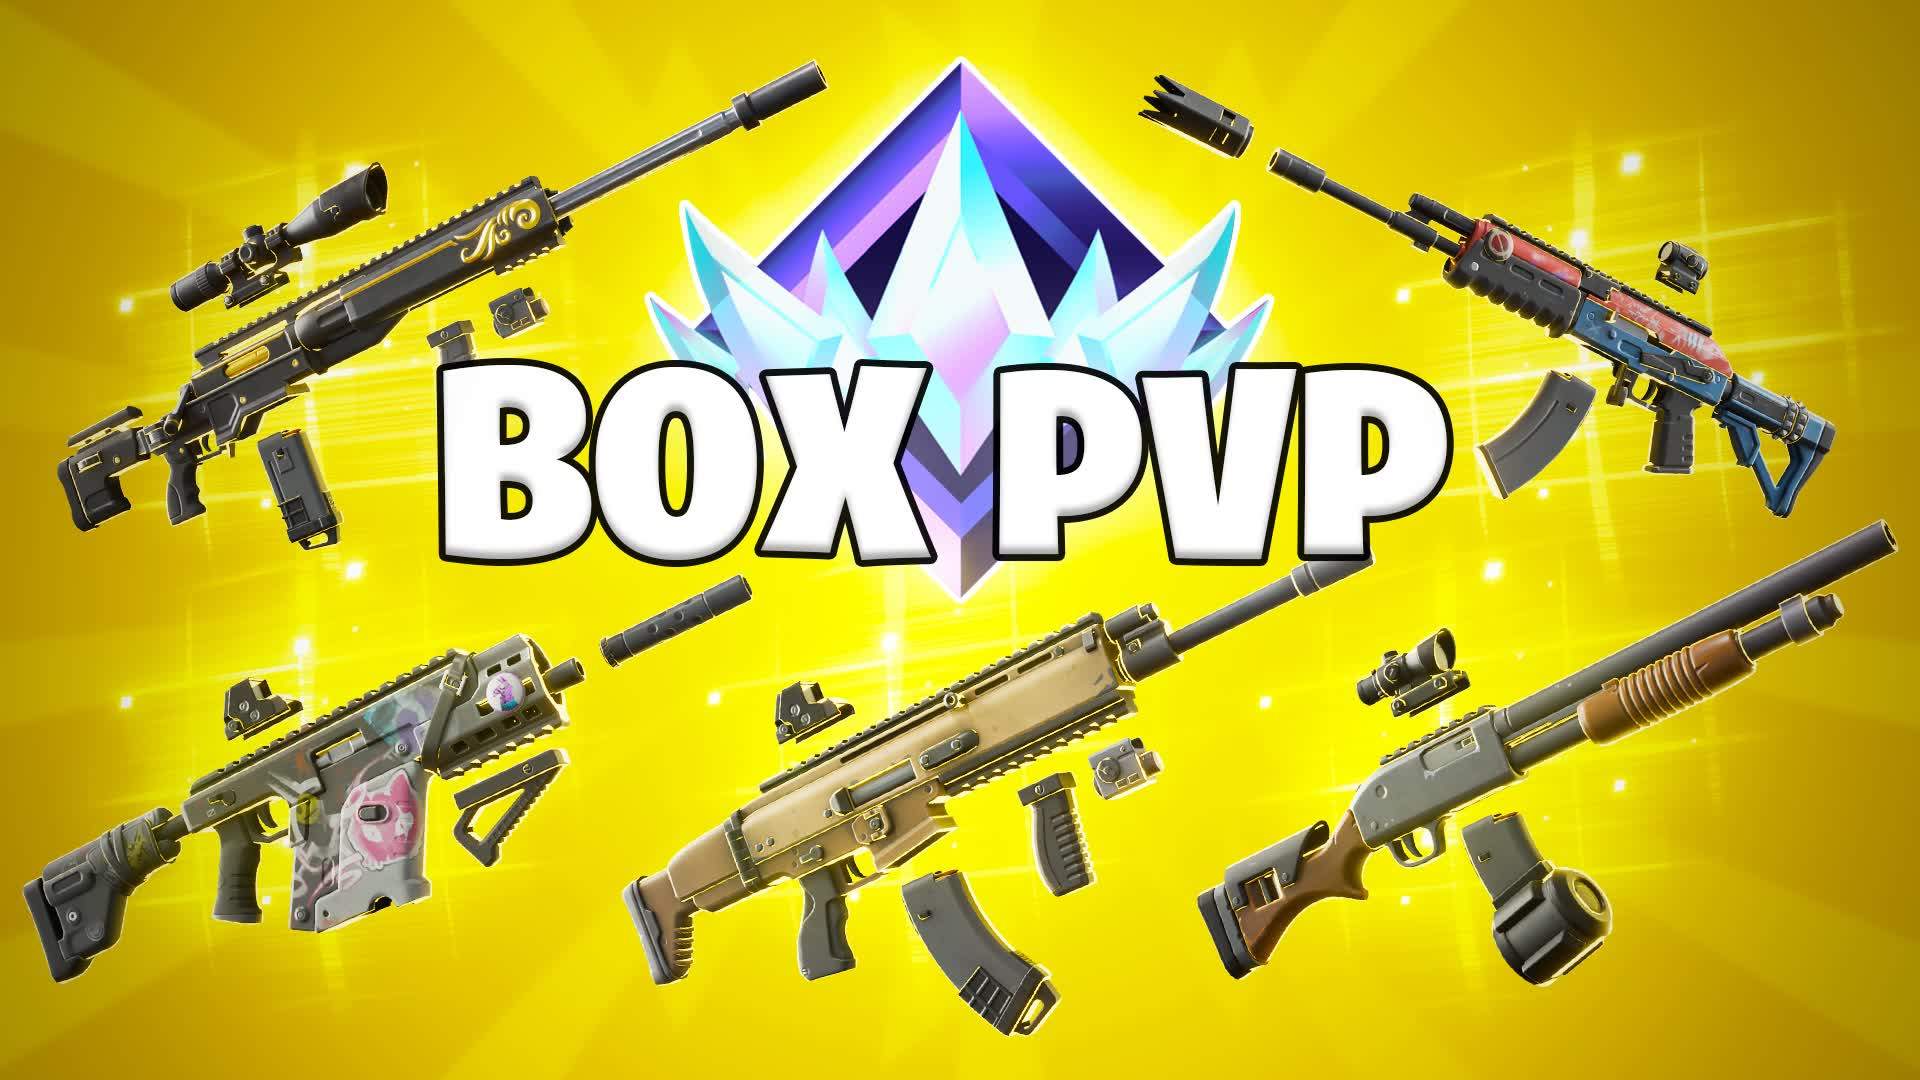 CH5 All Weapons Box PVP ⭐️